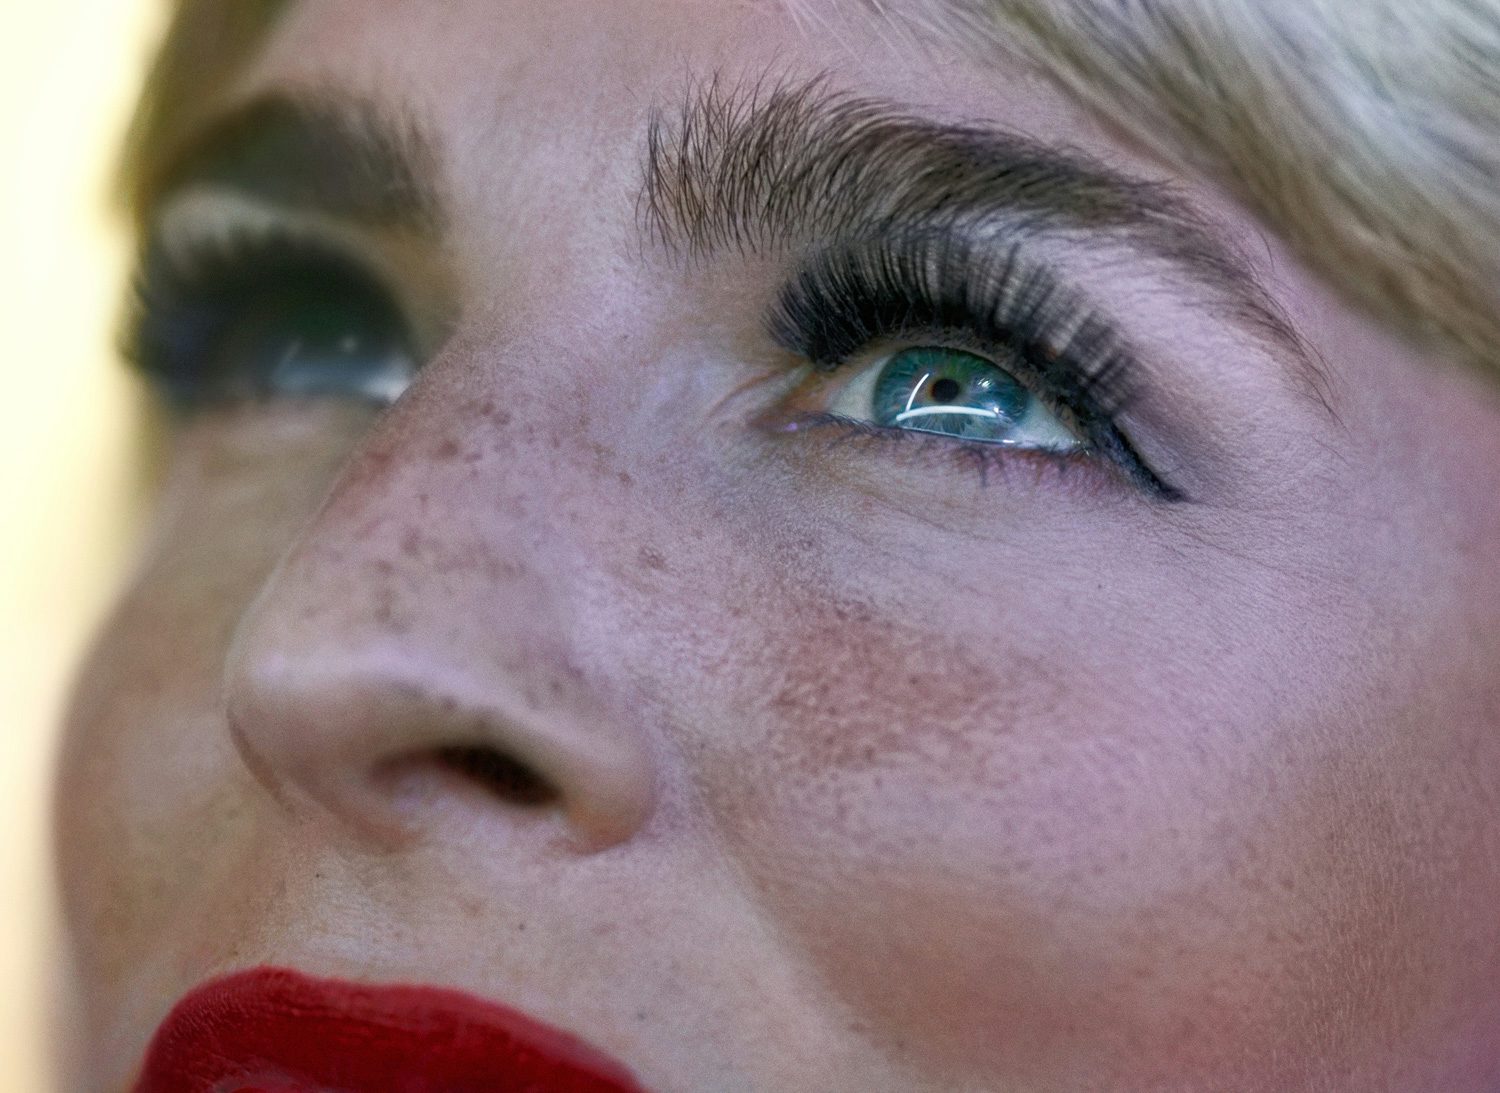 Image by Alex Prager shows a close-up of a person's face wearing red lipstick looking up